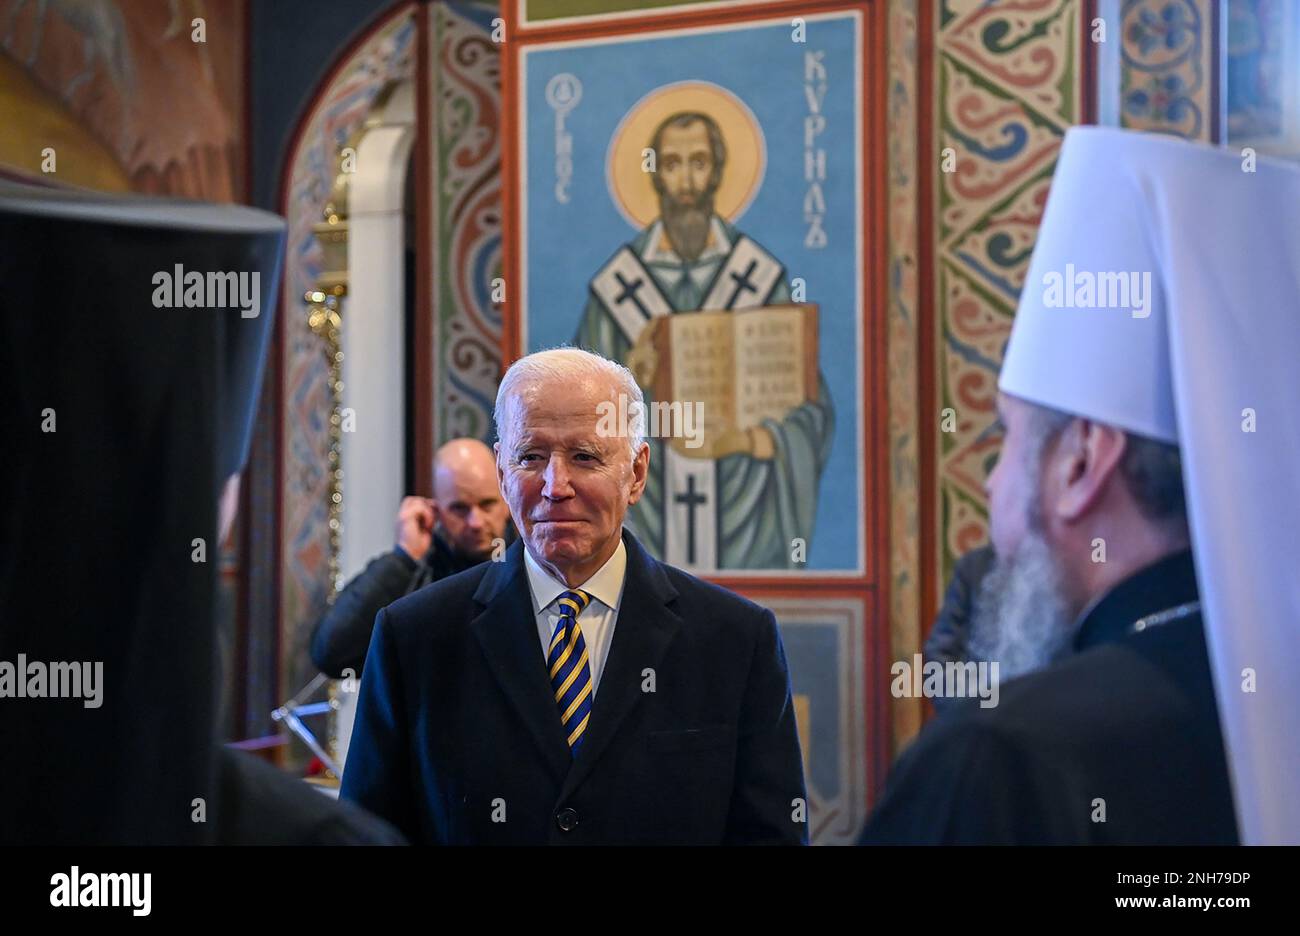 Kyiv, Ukraine. 20th Feb, 2023. US President Joe Biden and his Ukrainian Counterpart Volodymyr Zelensky (not seen) meet with priests at St. Michael's Golden-Domed Cathedral during an unannounced visit, on February 20, 2023 in Kyiv, Ukraine. The US President Joe Biden made his first unannounced wartime visit to Ukraine, in a show of support ahead of the one-year anniversary of Russia's invasion on February 24. Photo by Ukrainian Orthodox Church (OCU)/ Credit: UPI/Alamy Live News Stock Photo